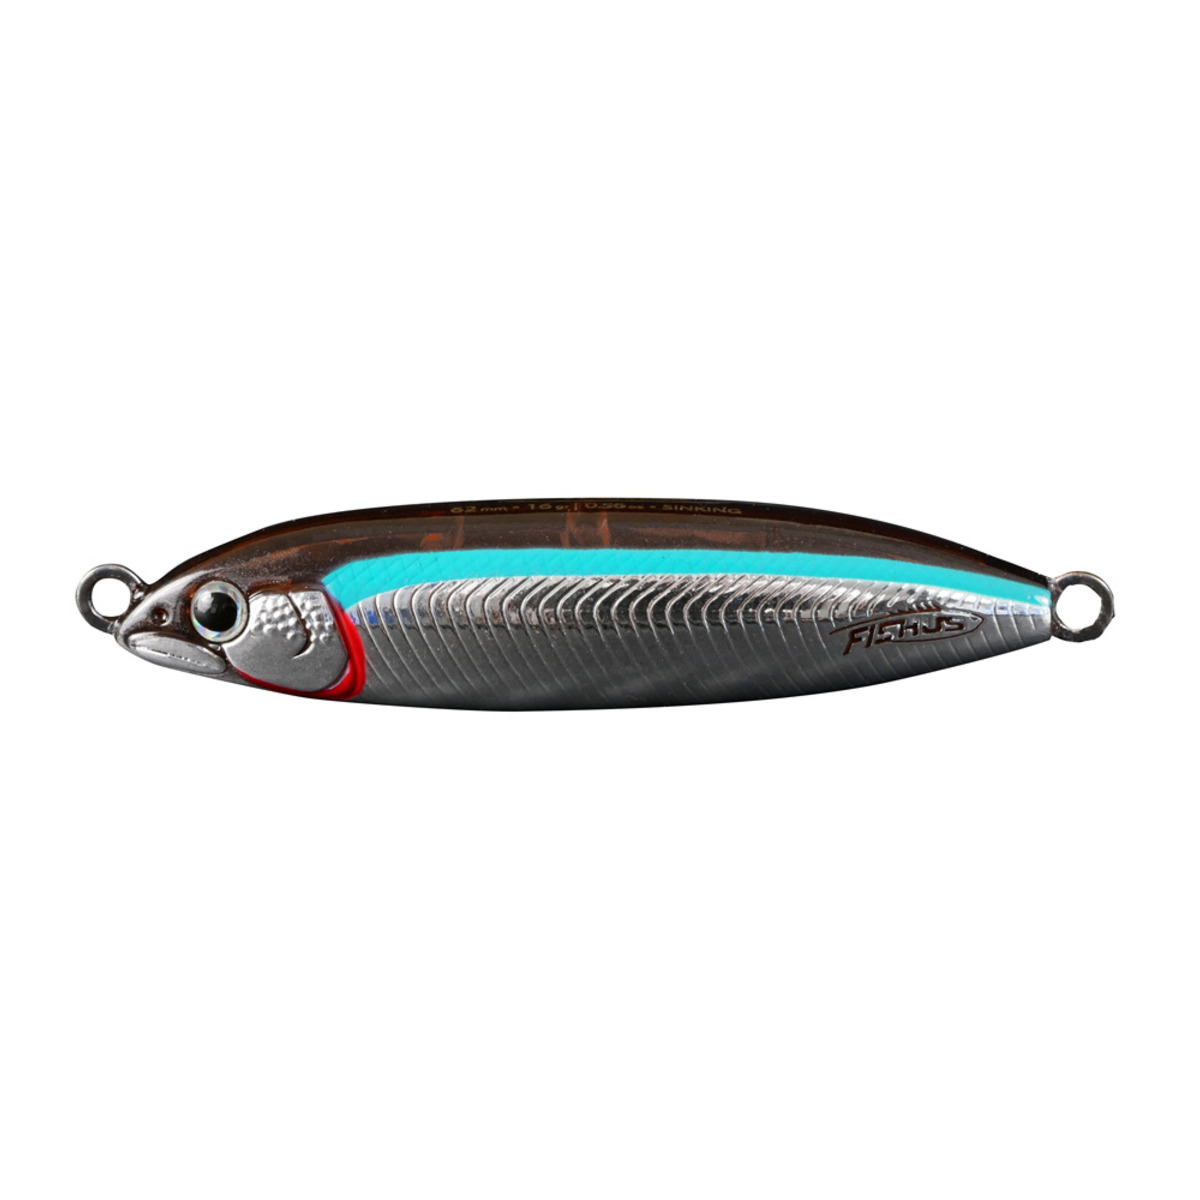 Fishus Wobly 62 - Candy Black